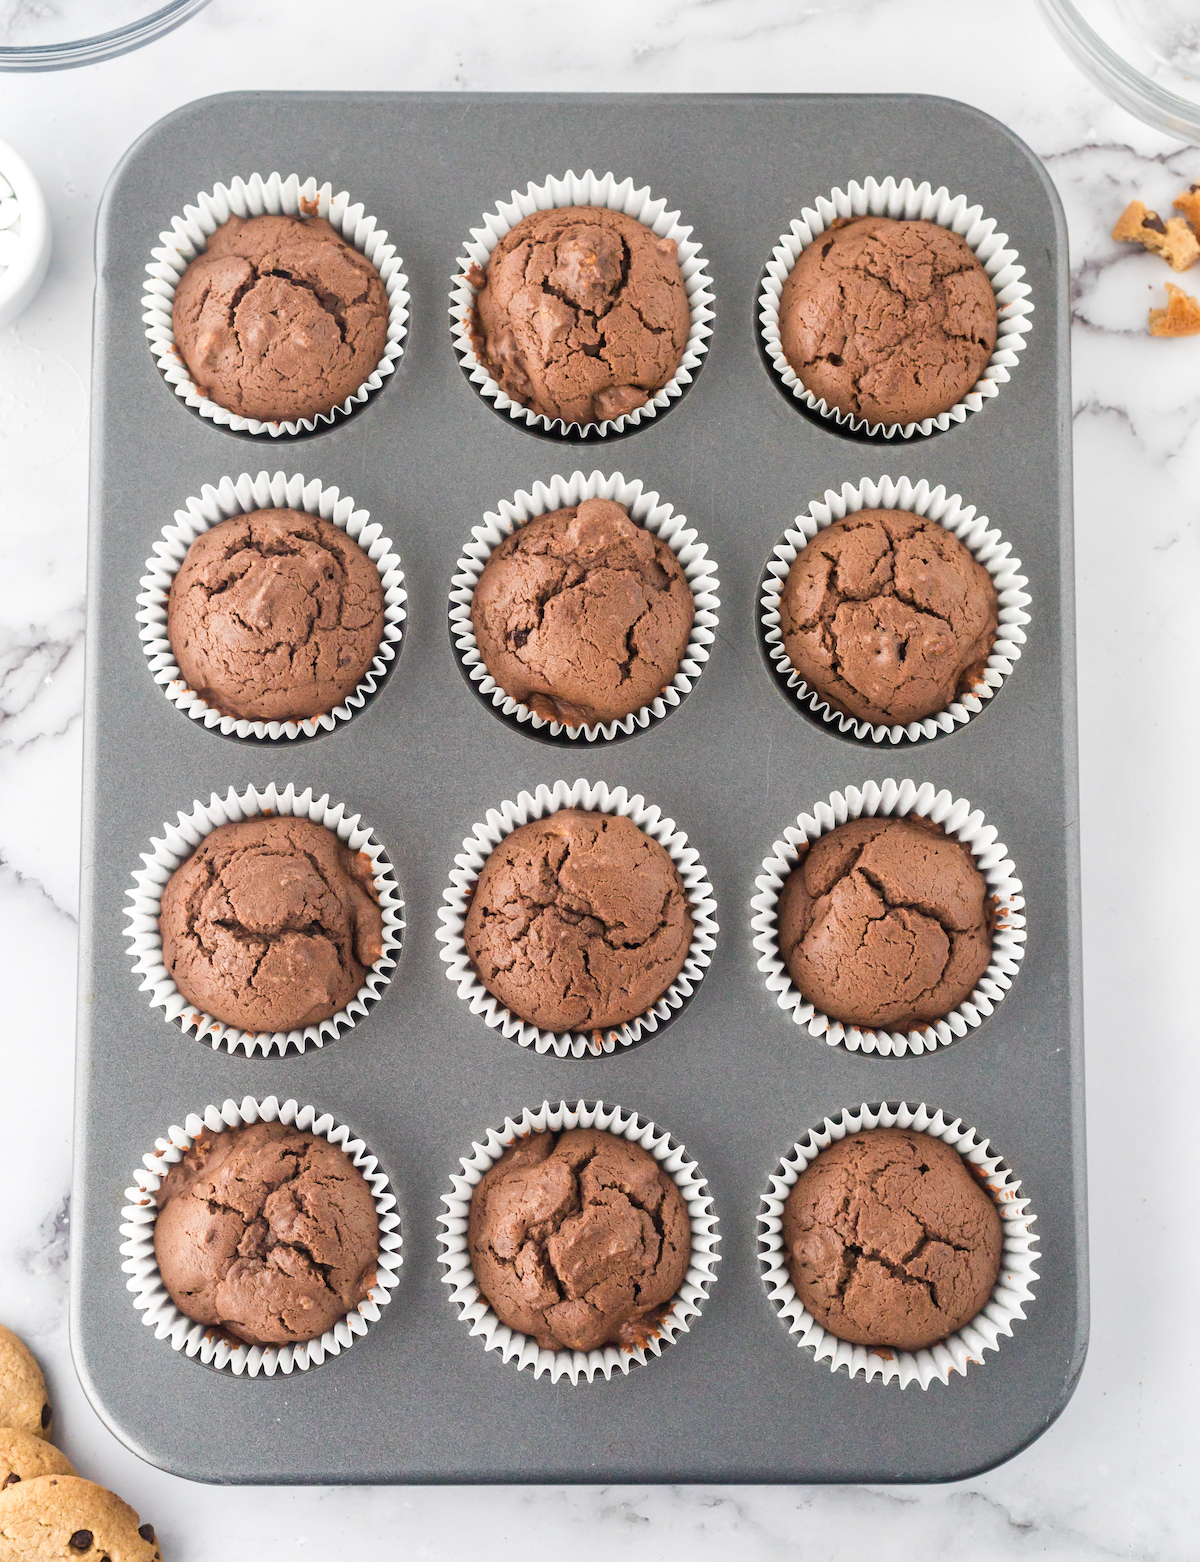 Baked chocolate cupcakes in a cupcake pan